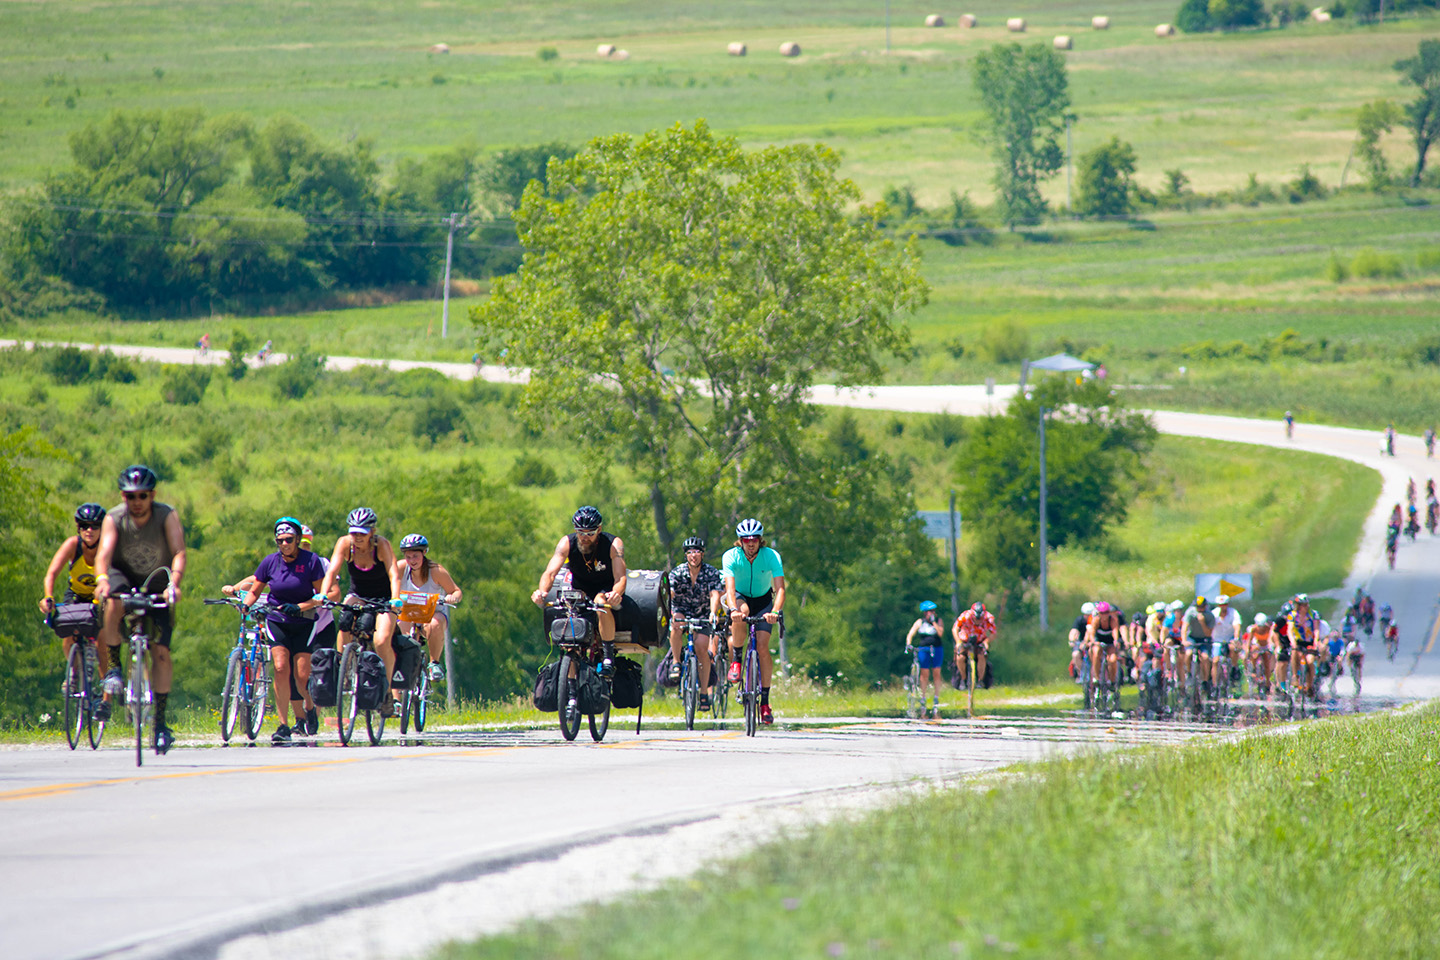 Questions About RAGBRAI? Here's What To Know Ahead Of The 2021 Ride